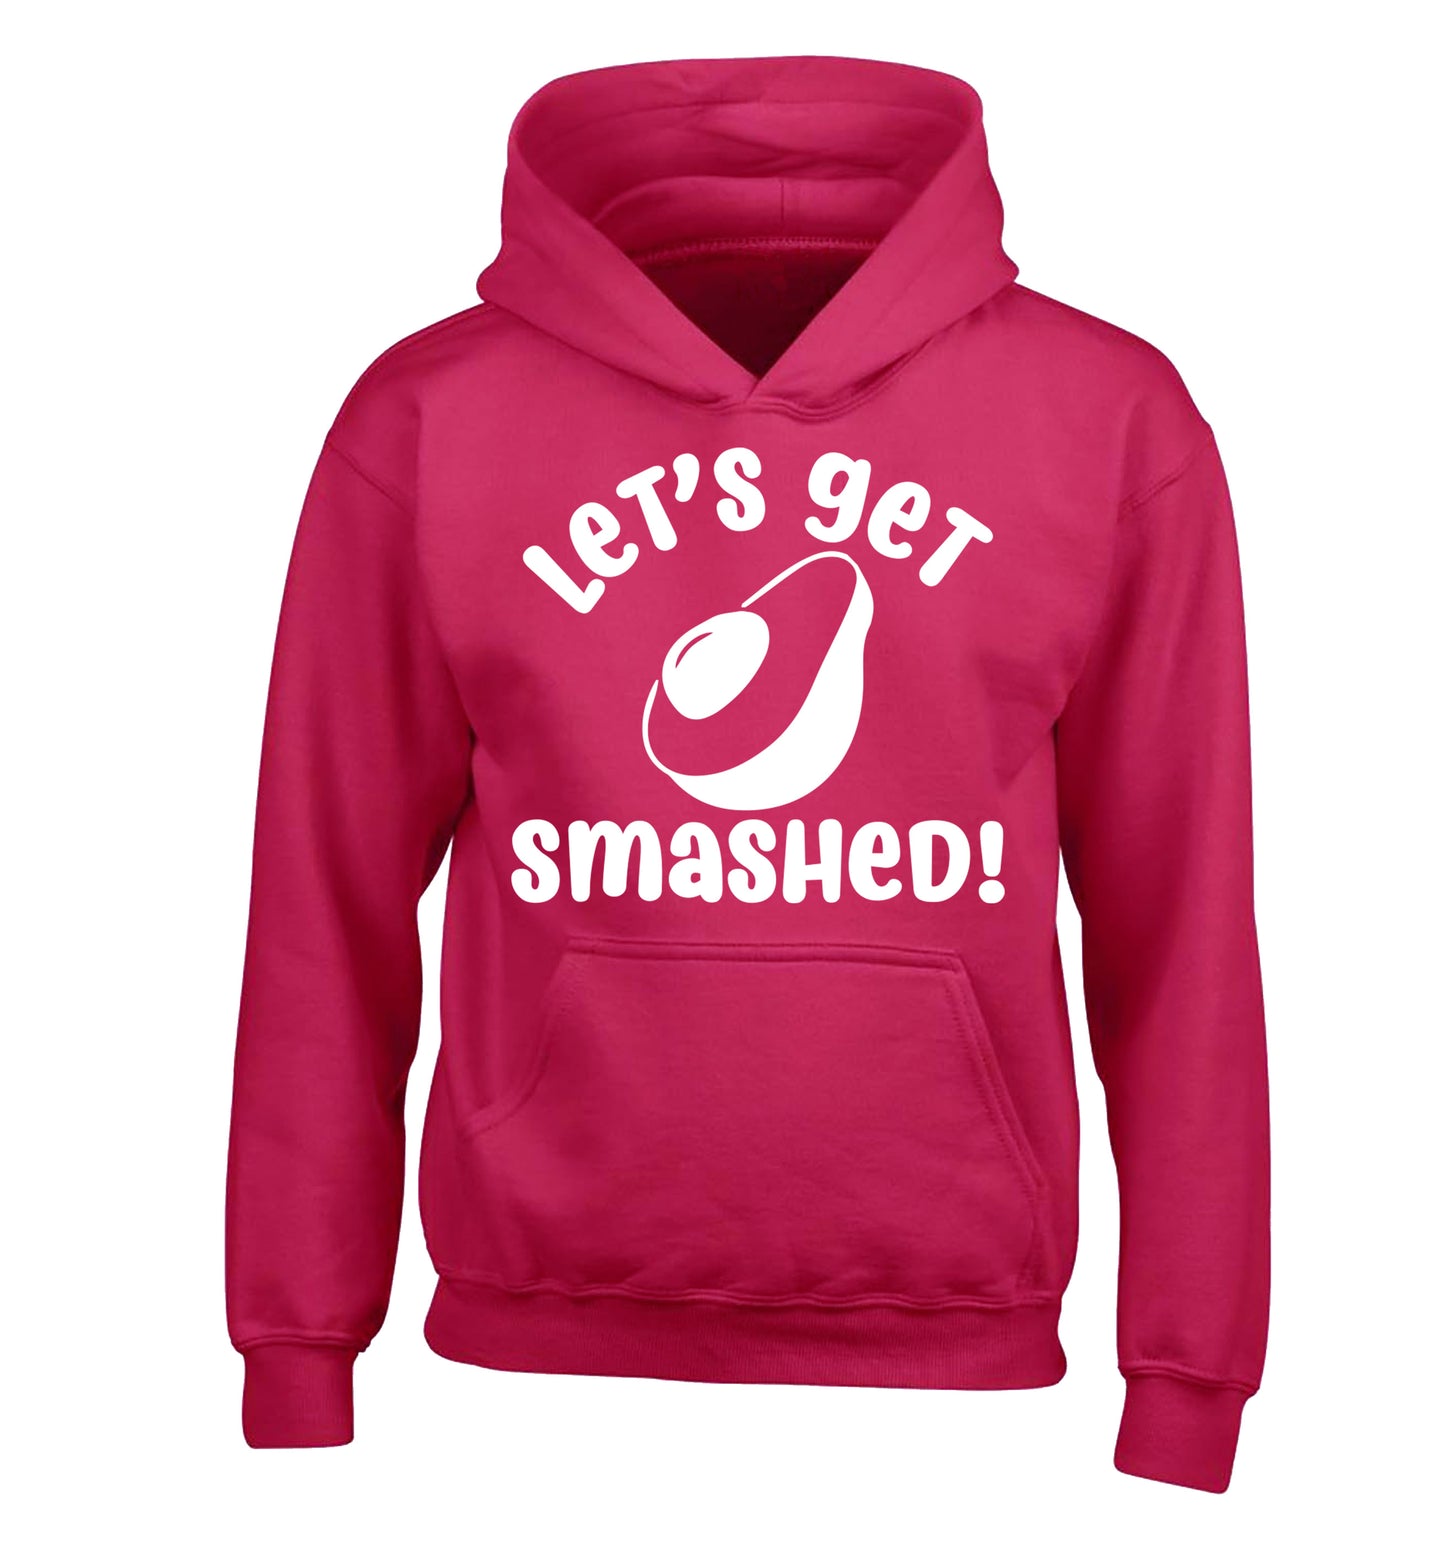 Let's get smashed children's pink hoodie 12-14 Years